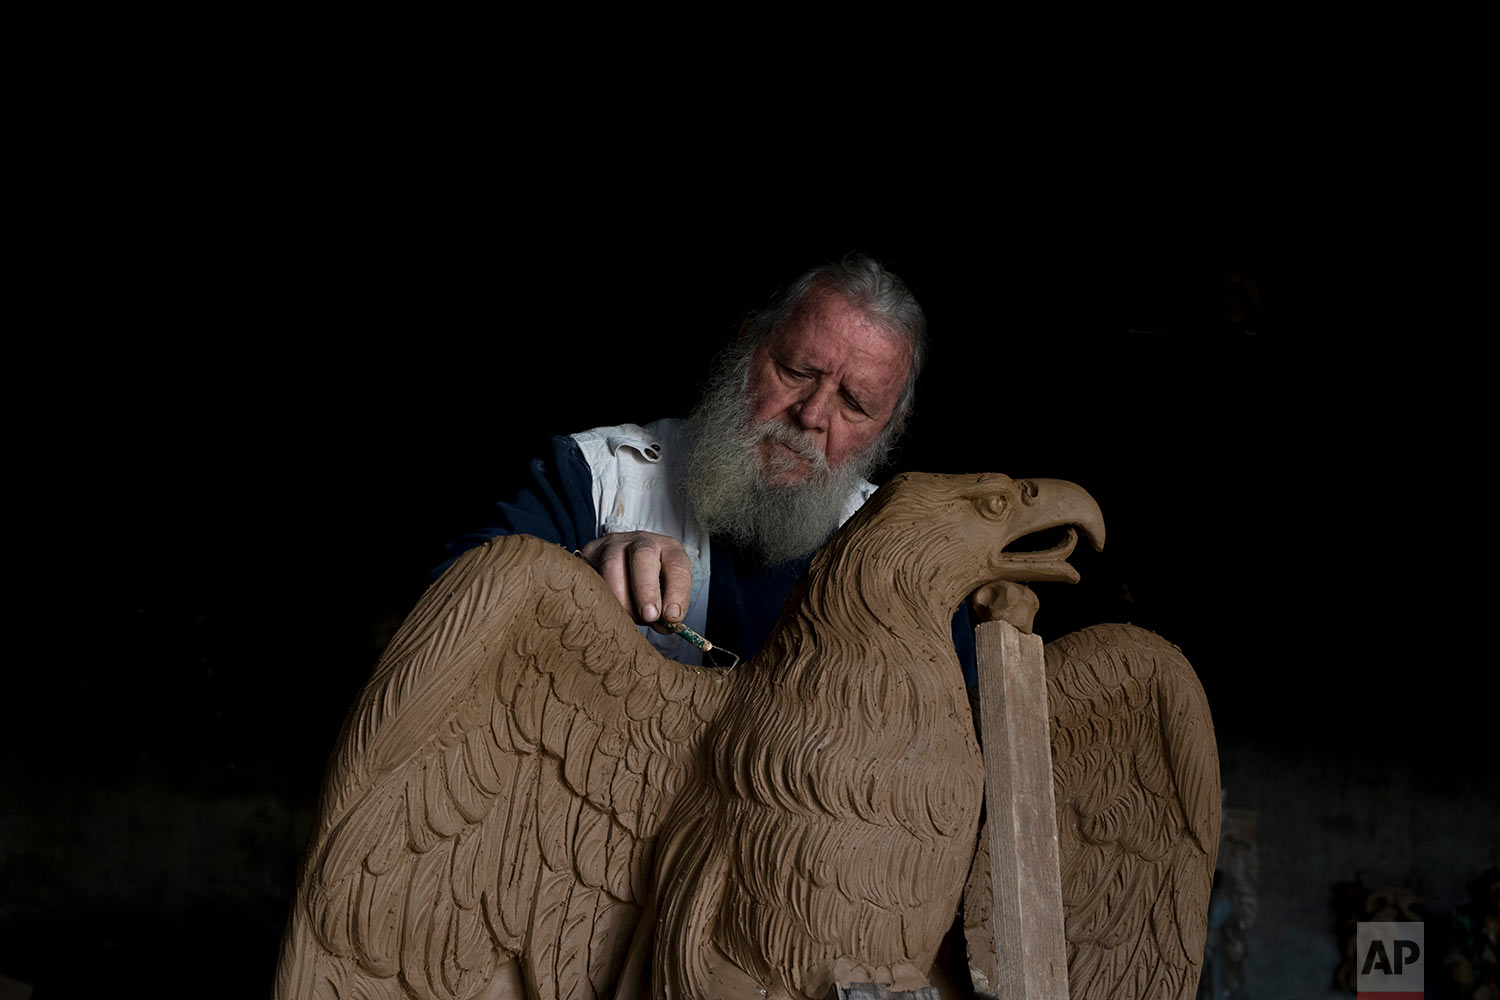  In this Tuesday, Nov. 14, 2017 photo, sculptor and ceramicist Haralambos Goumas works on a terracotta eagle, at his workshop, in the Egaleo suburb of Athens.  (AP Photo/Petros Giannakouris) 